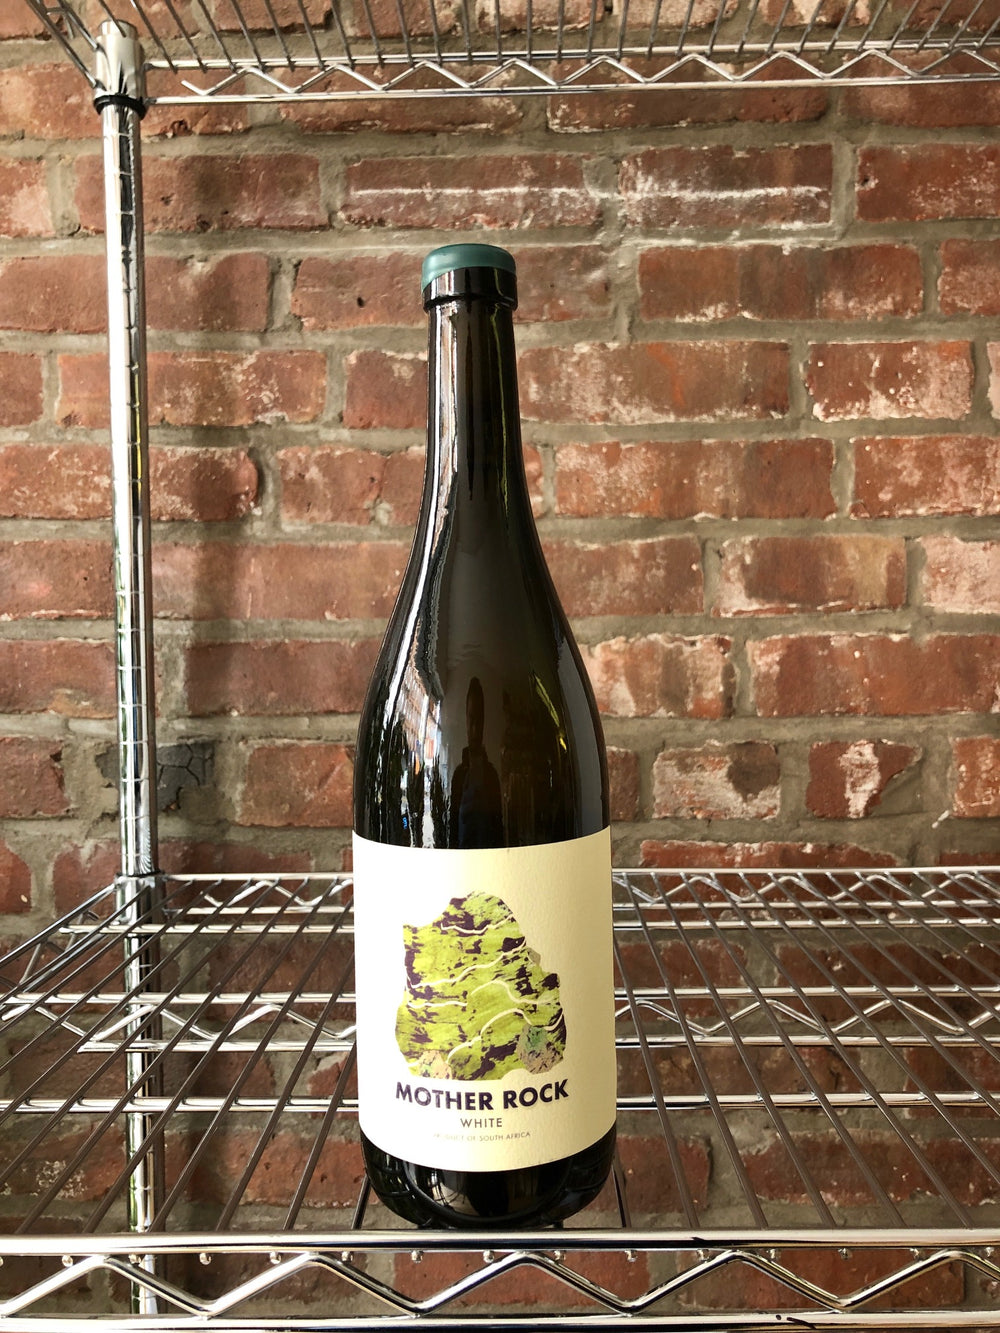 2018 Mother Rock White, Swartland, South Africa